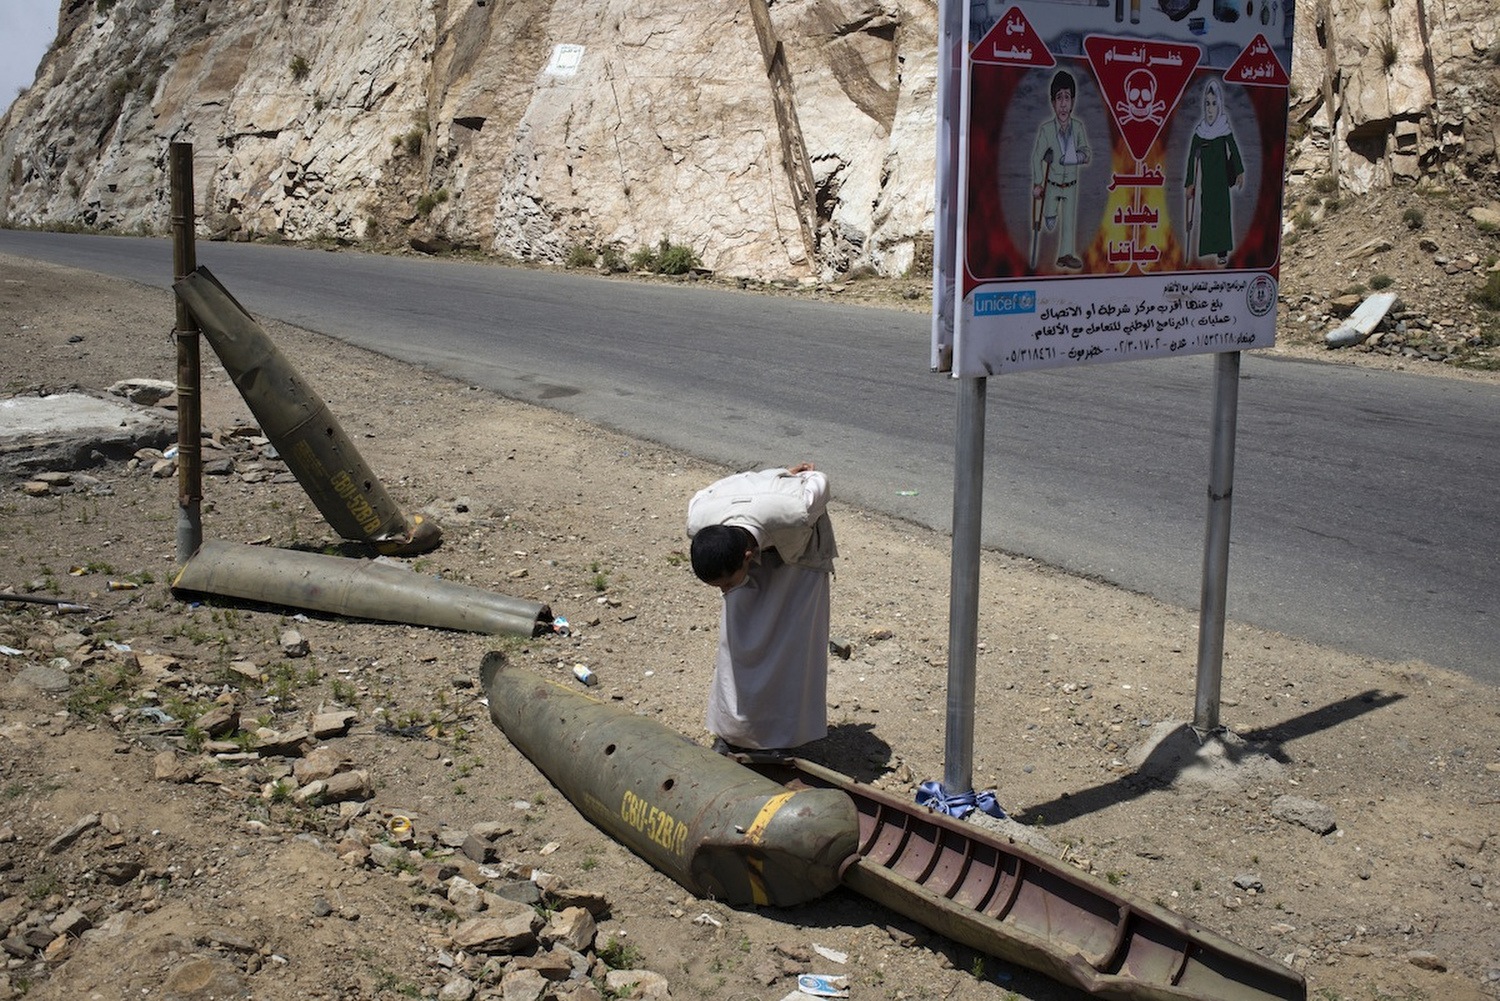 A Houthi supporter looks at shells left from the last war in Sa'ada, in 20TK. Missiles bearing the name of the United States armed forces still lay on the mountain slopes.